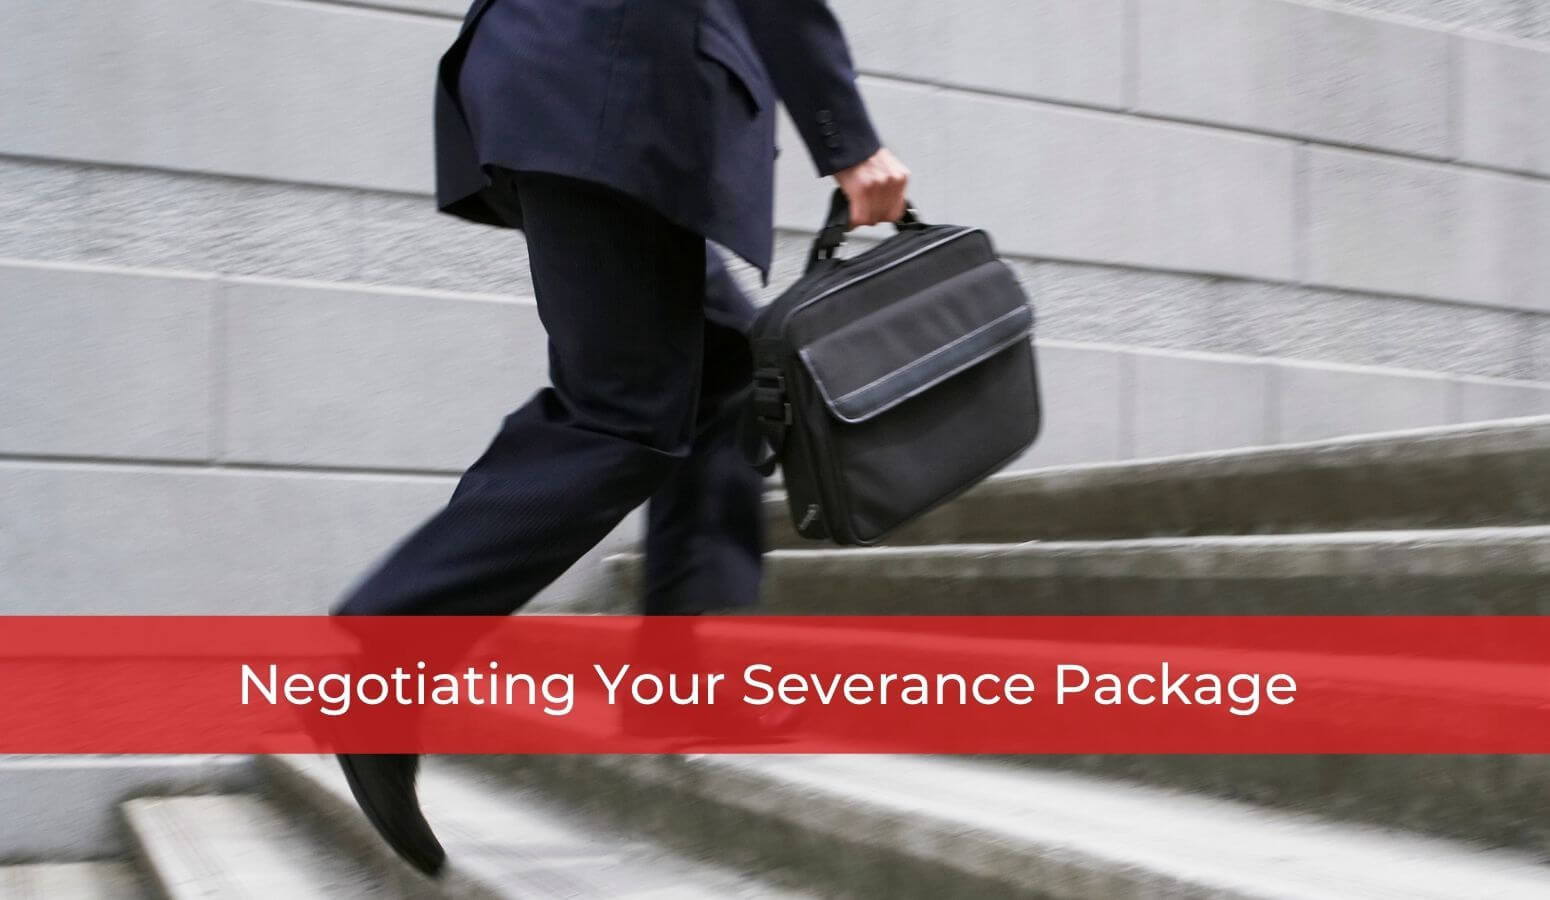 Negotiating Your Severance Package - May 26 - Whitten & Lublin Employment Lawyers - Toronto Employment Lawyers - Severance Lawyers